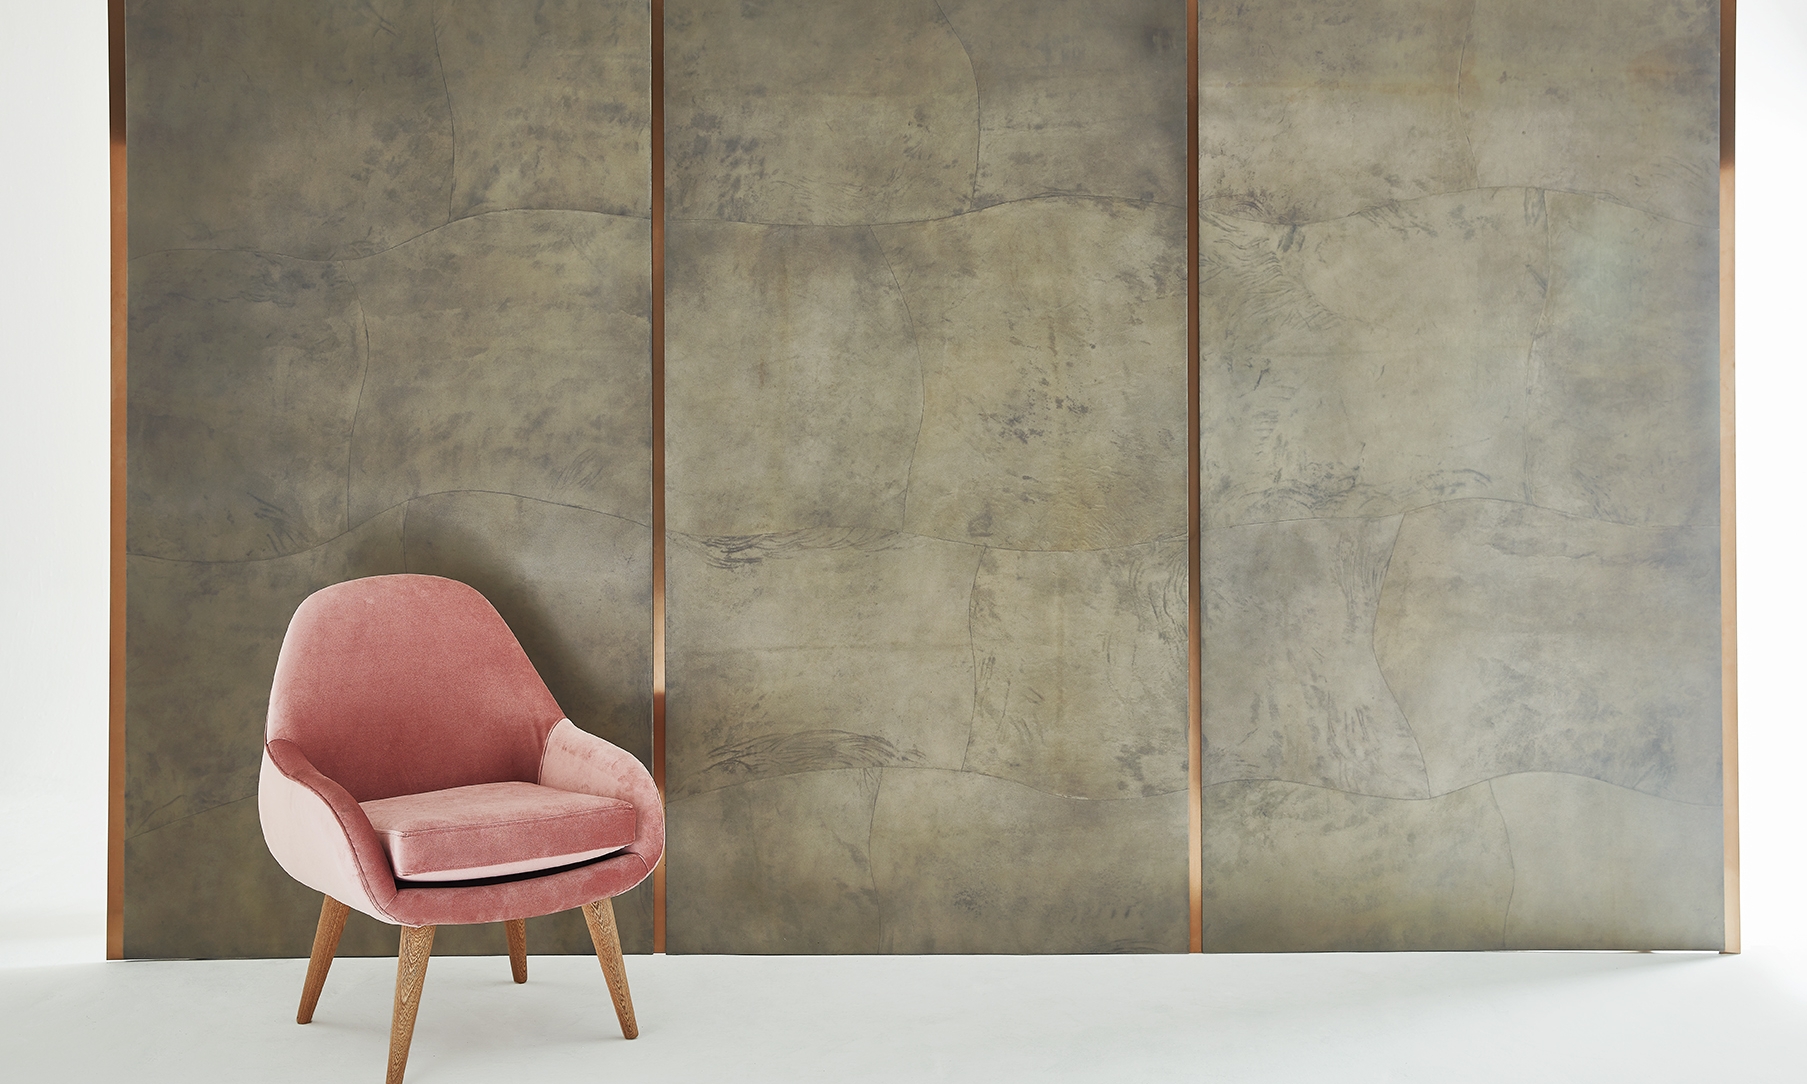  Jimeco architectural finishes shown in: pearlized concrete parchment with copper reveals 